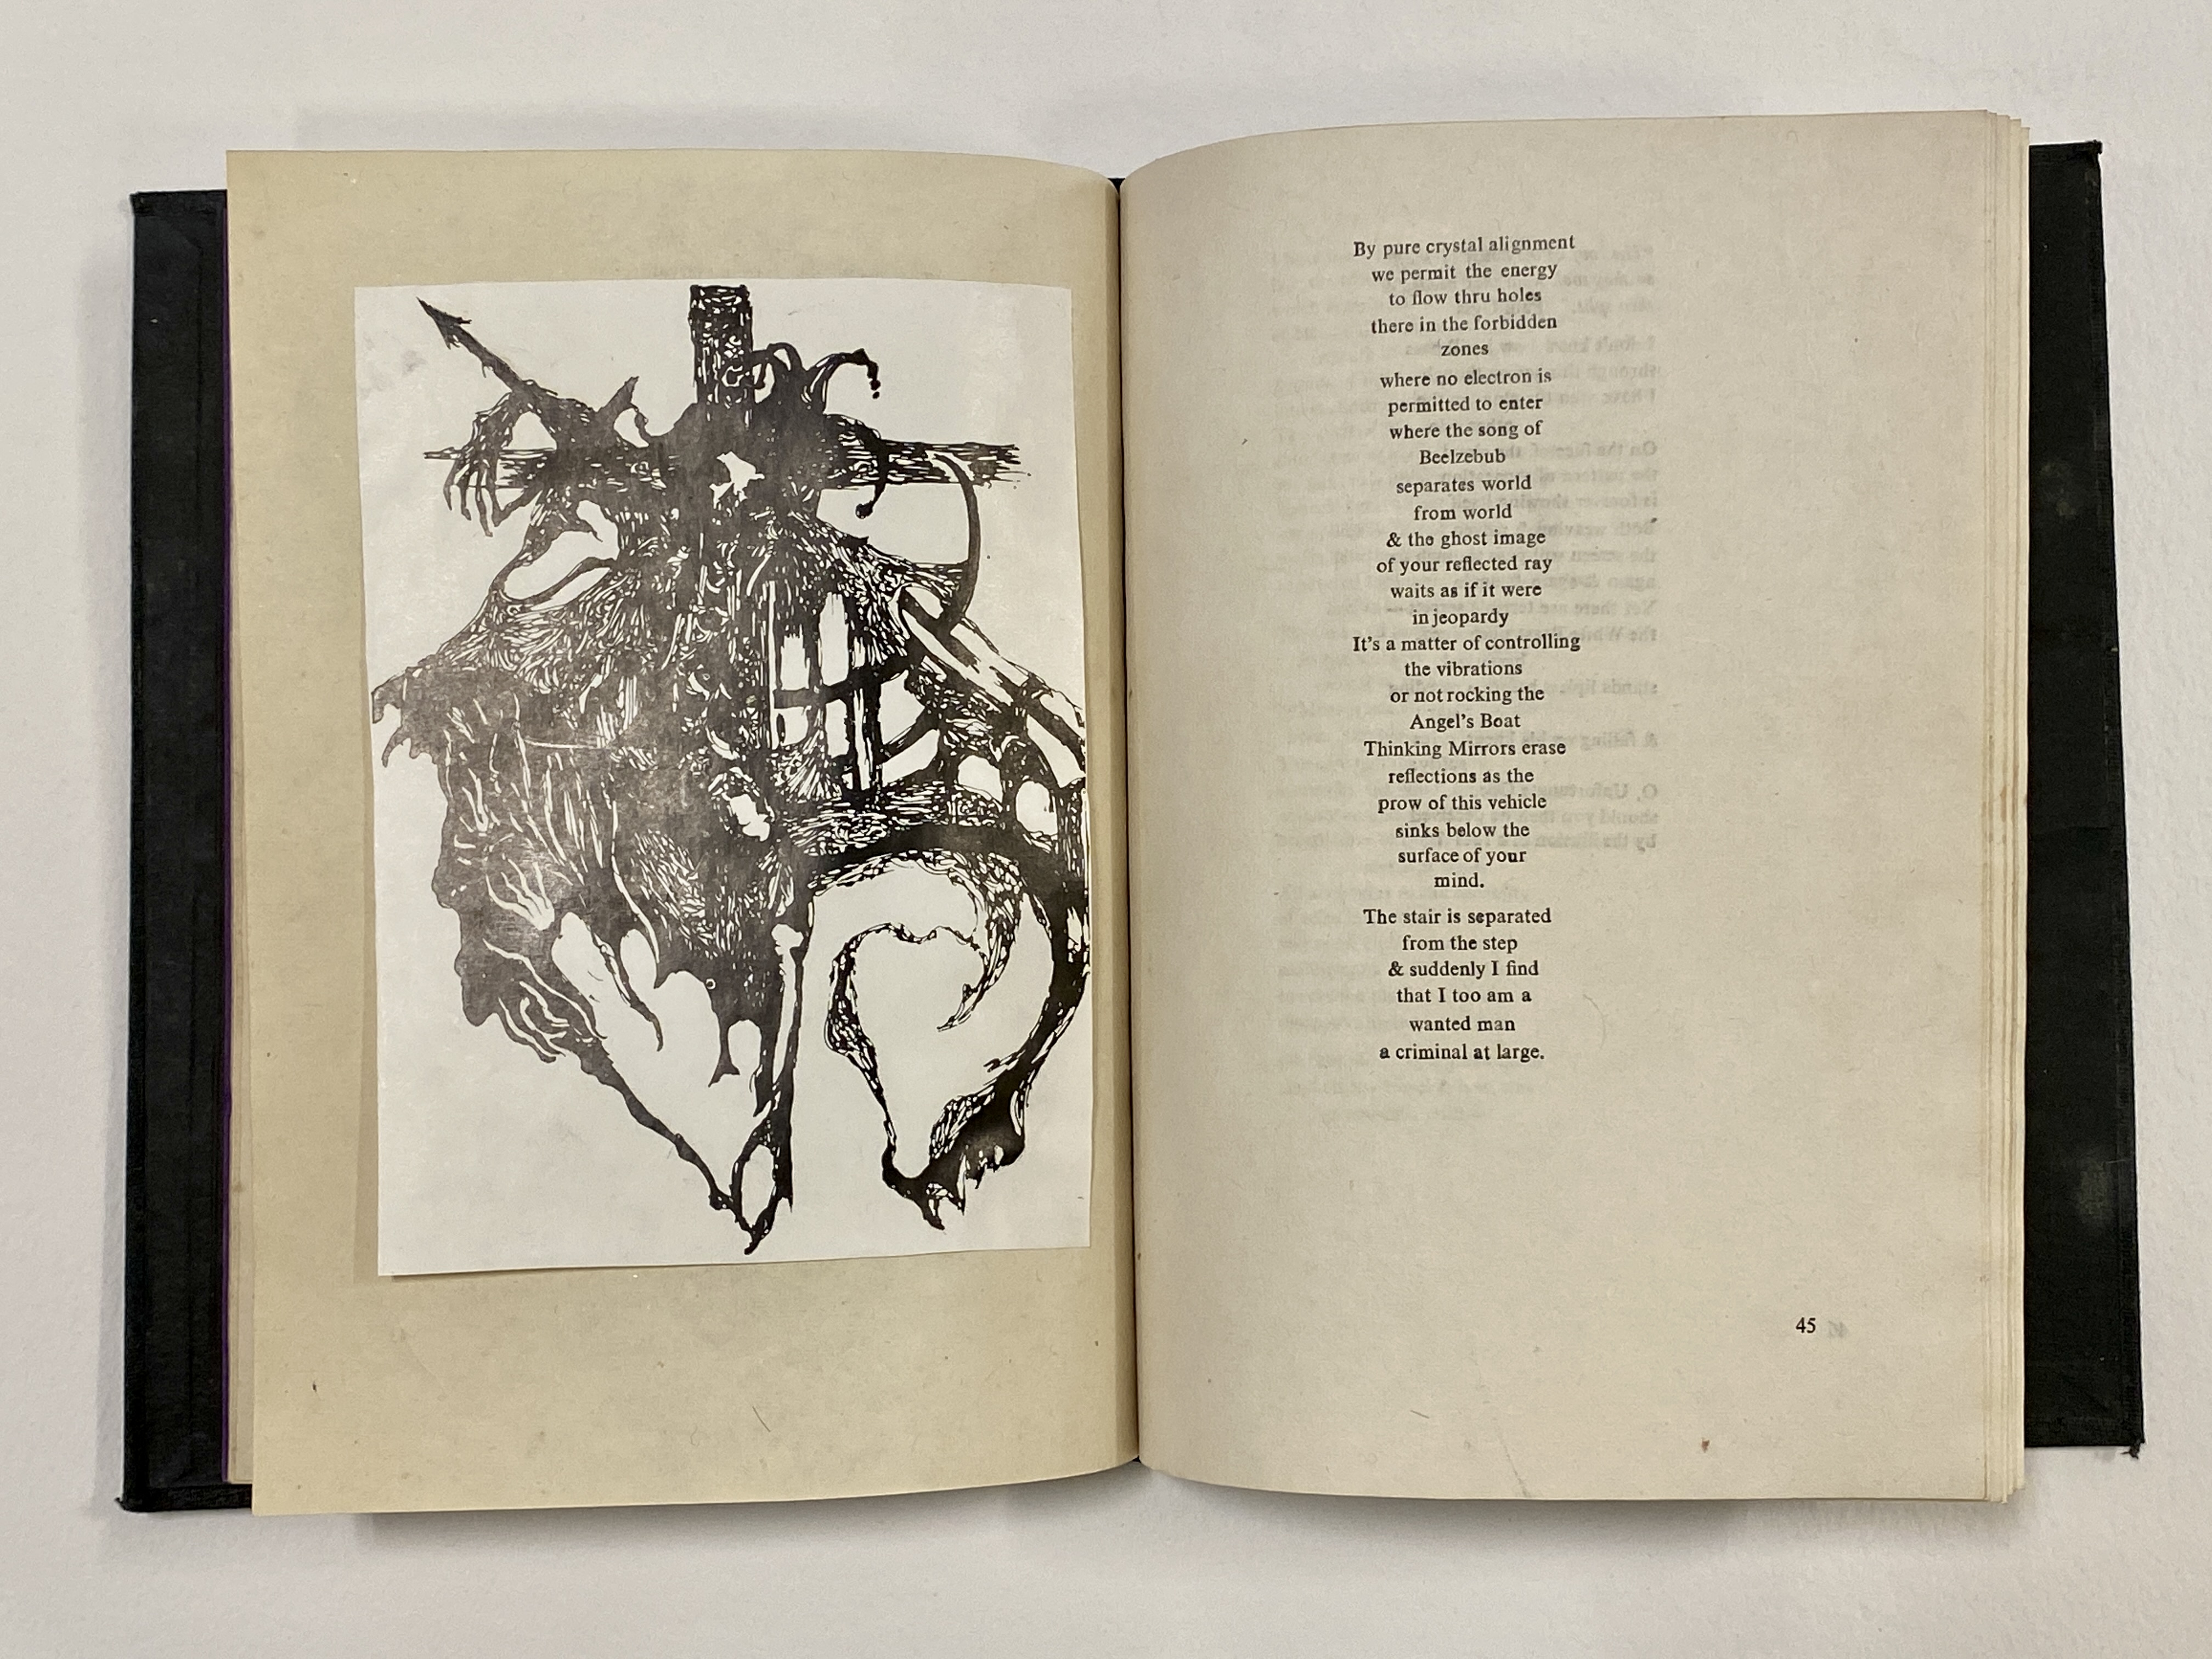 A hardcover book with black endpapers is open on a table. It is open to a page spread with a mounted print of a drawing on the verso, and a narrow column of verse on the recto.